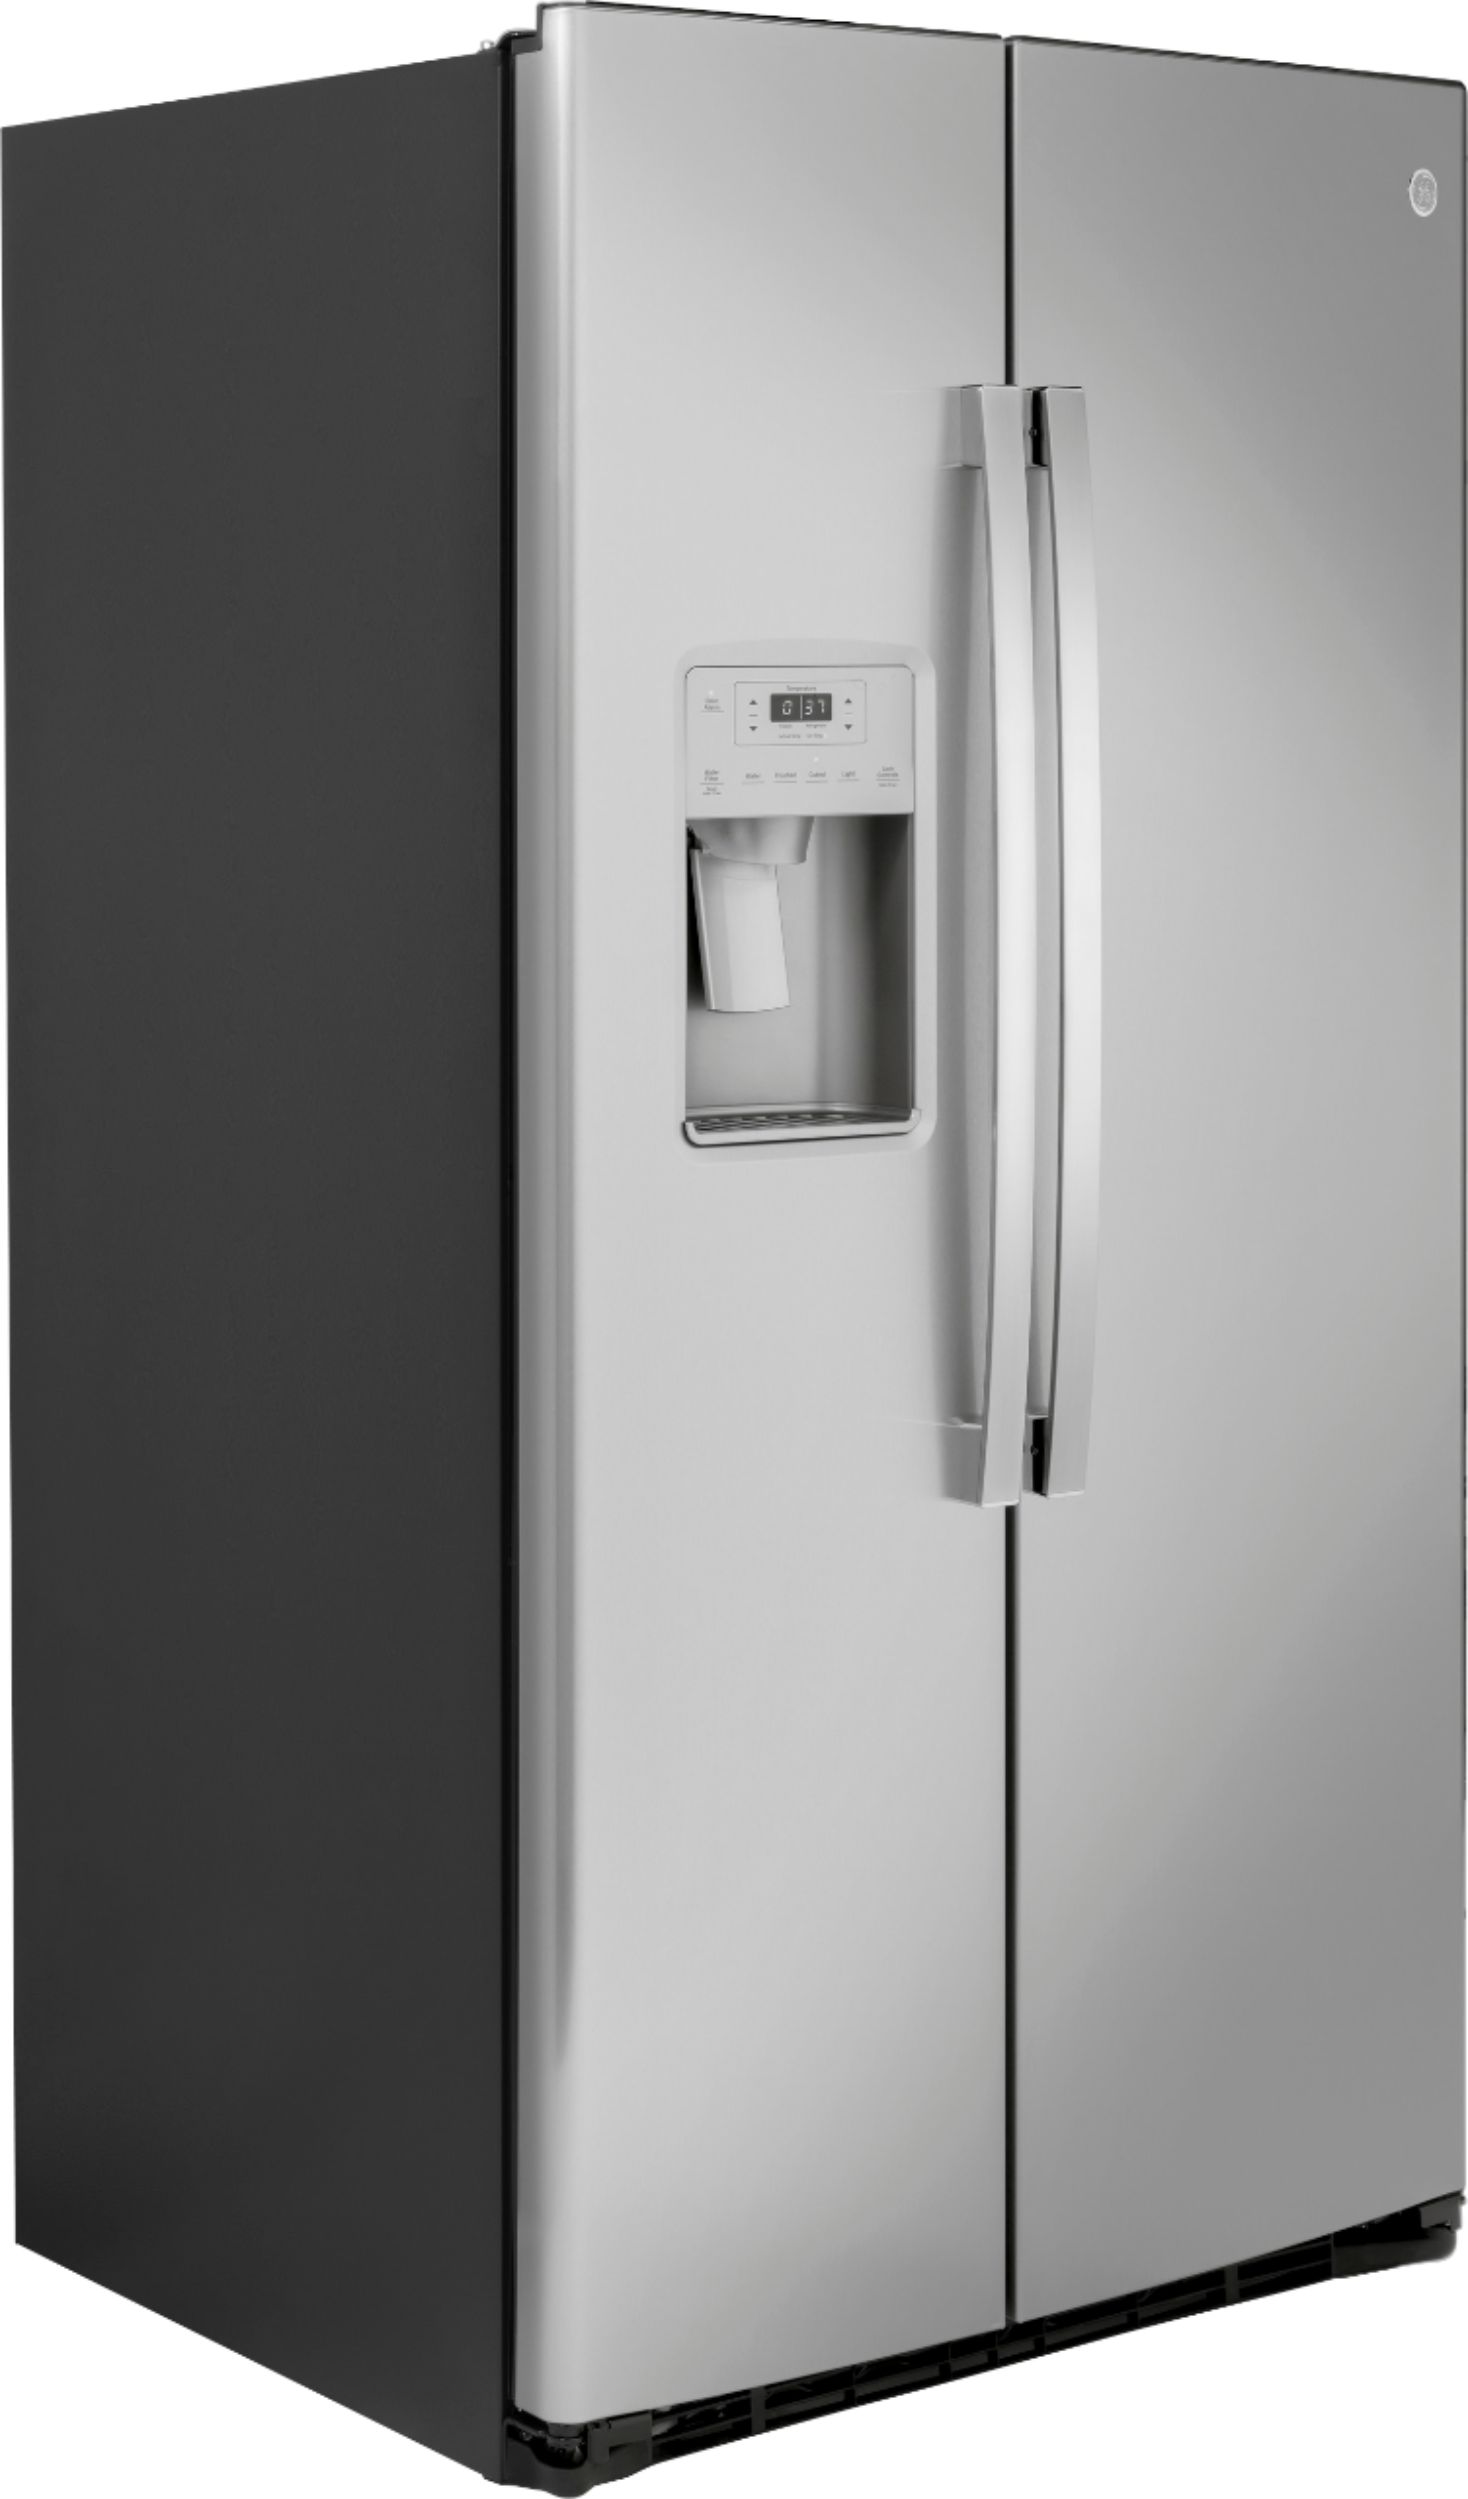 Angle View: GE - 25.1 Cu. Ft. Side-By-Side Refrigerator with External Ice & Water Dispenser - Stainless Steel